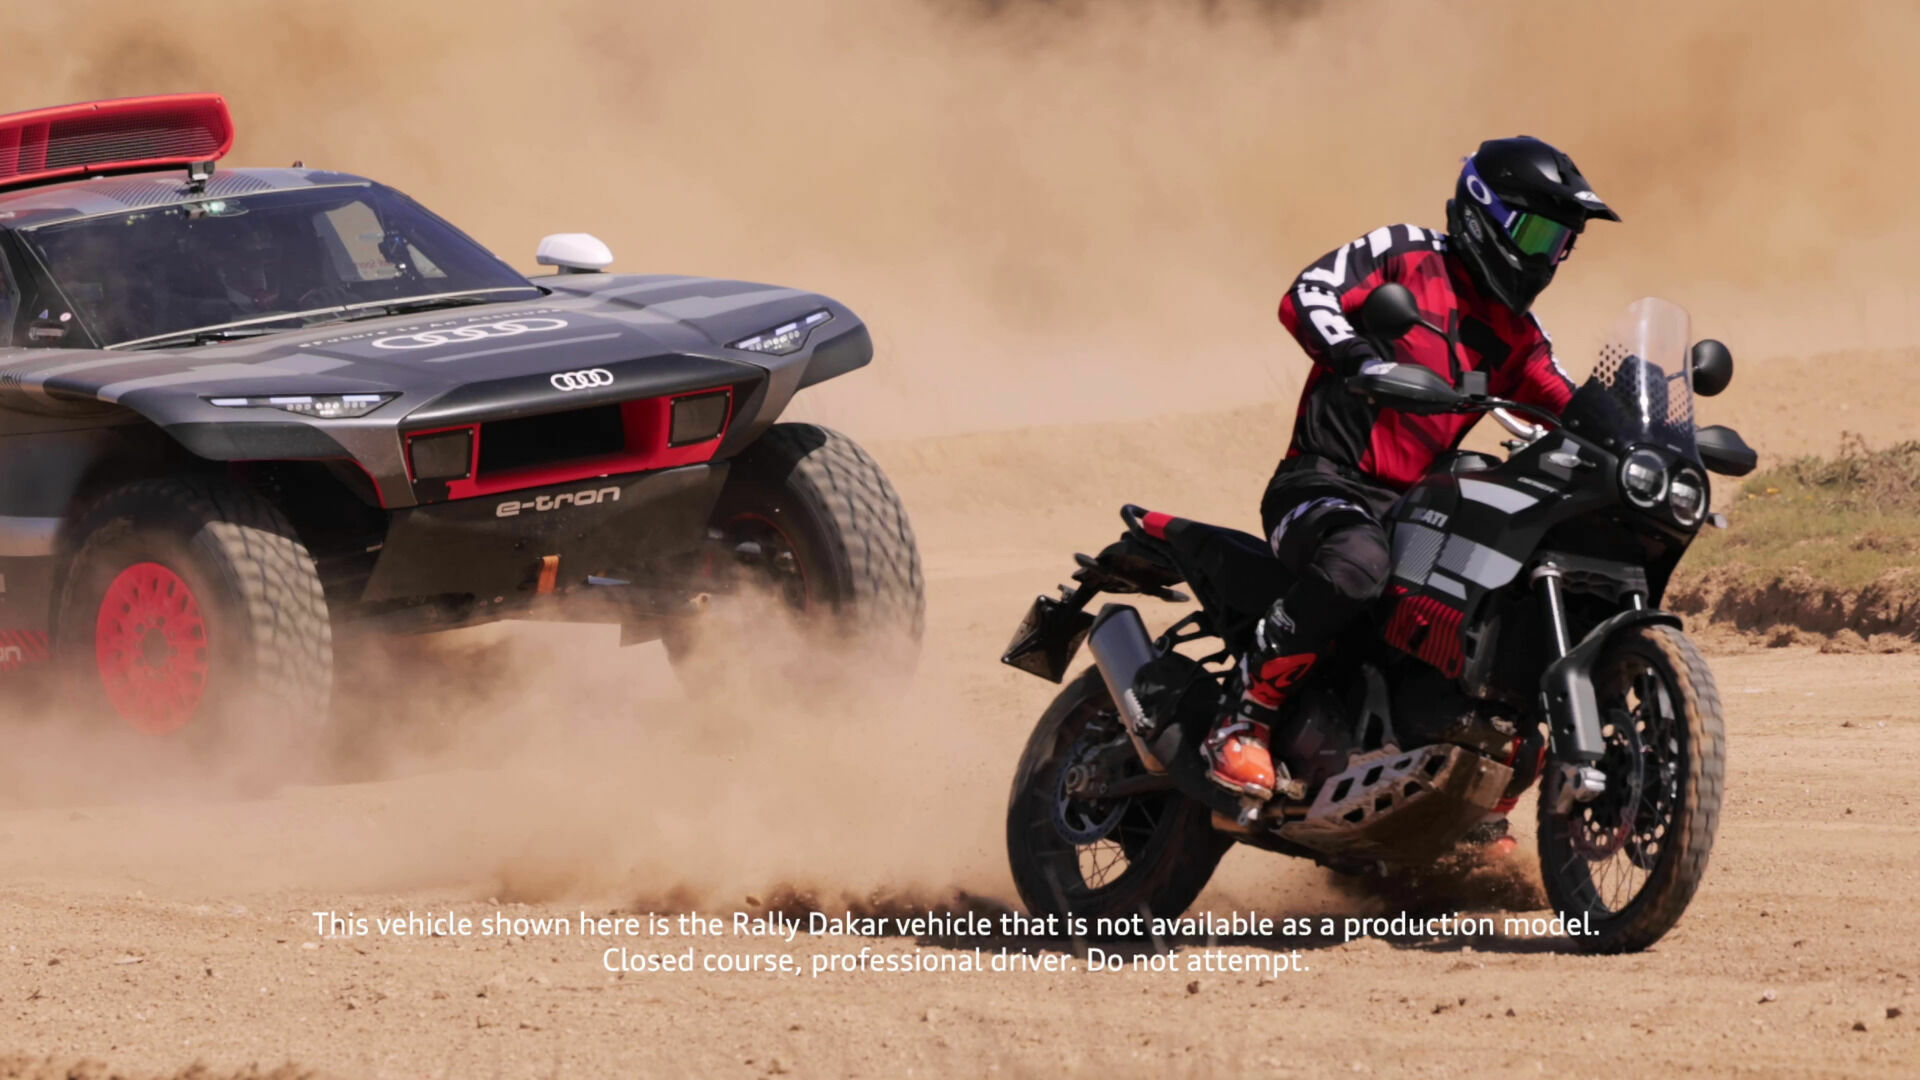 Double premiere: Audi and Ducati inspire at offroad event